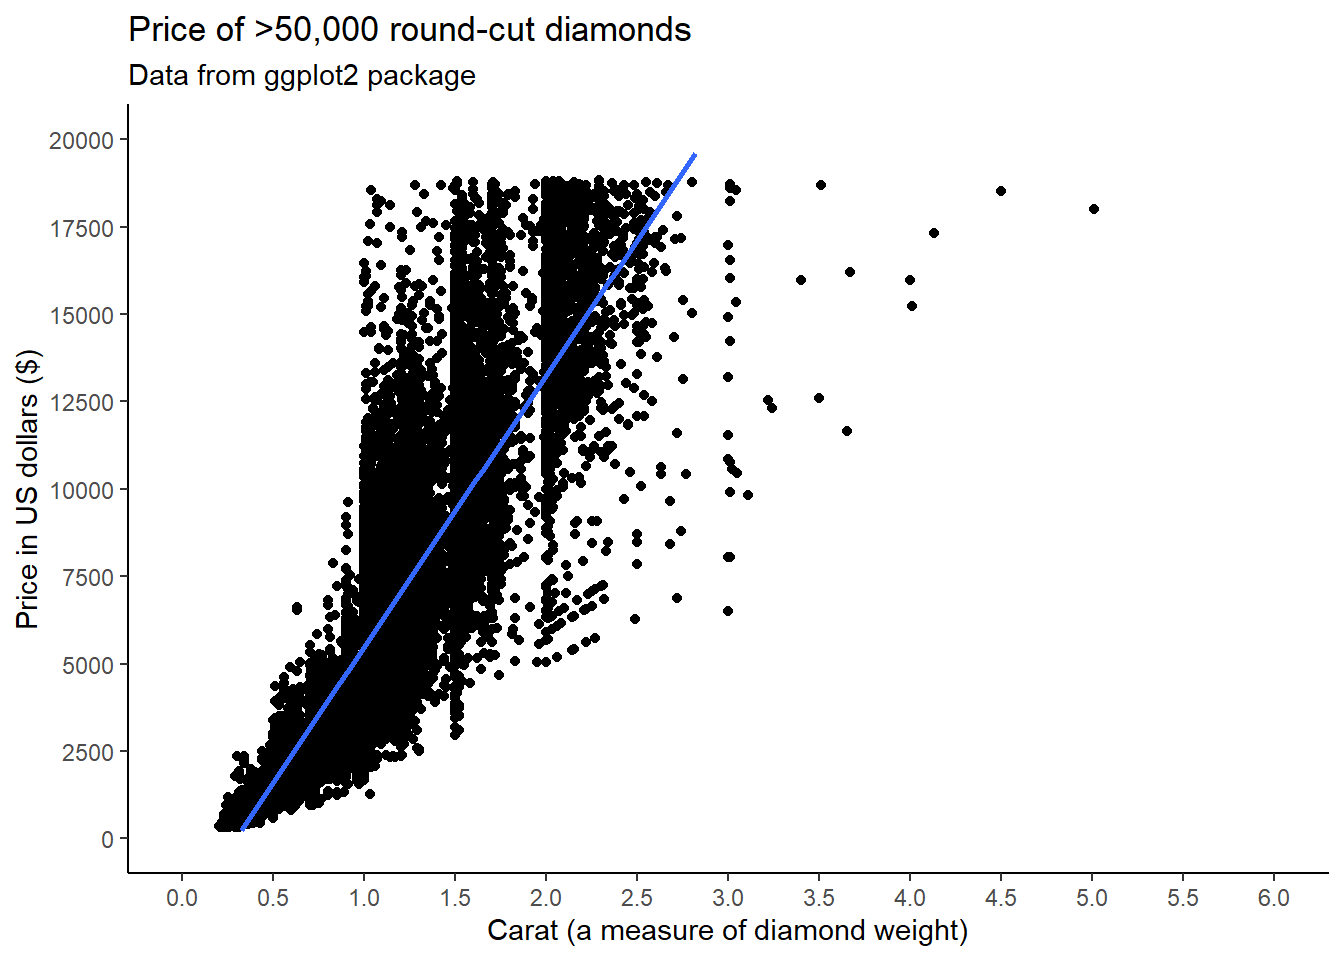 A ggplot object with a geom_point layer, the price of diamonds by their carat, regression line added